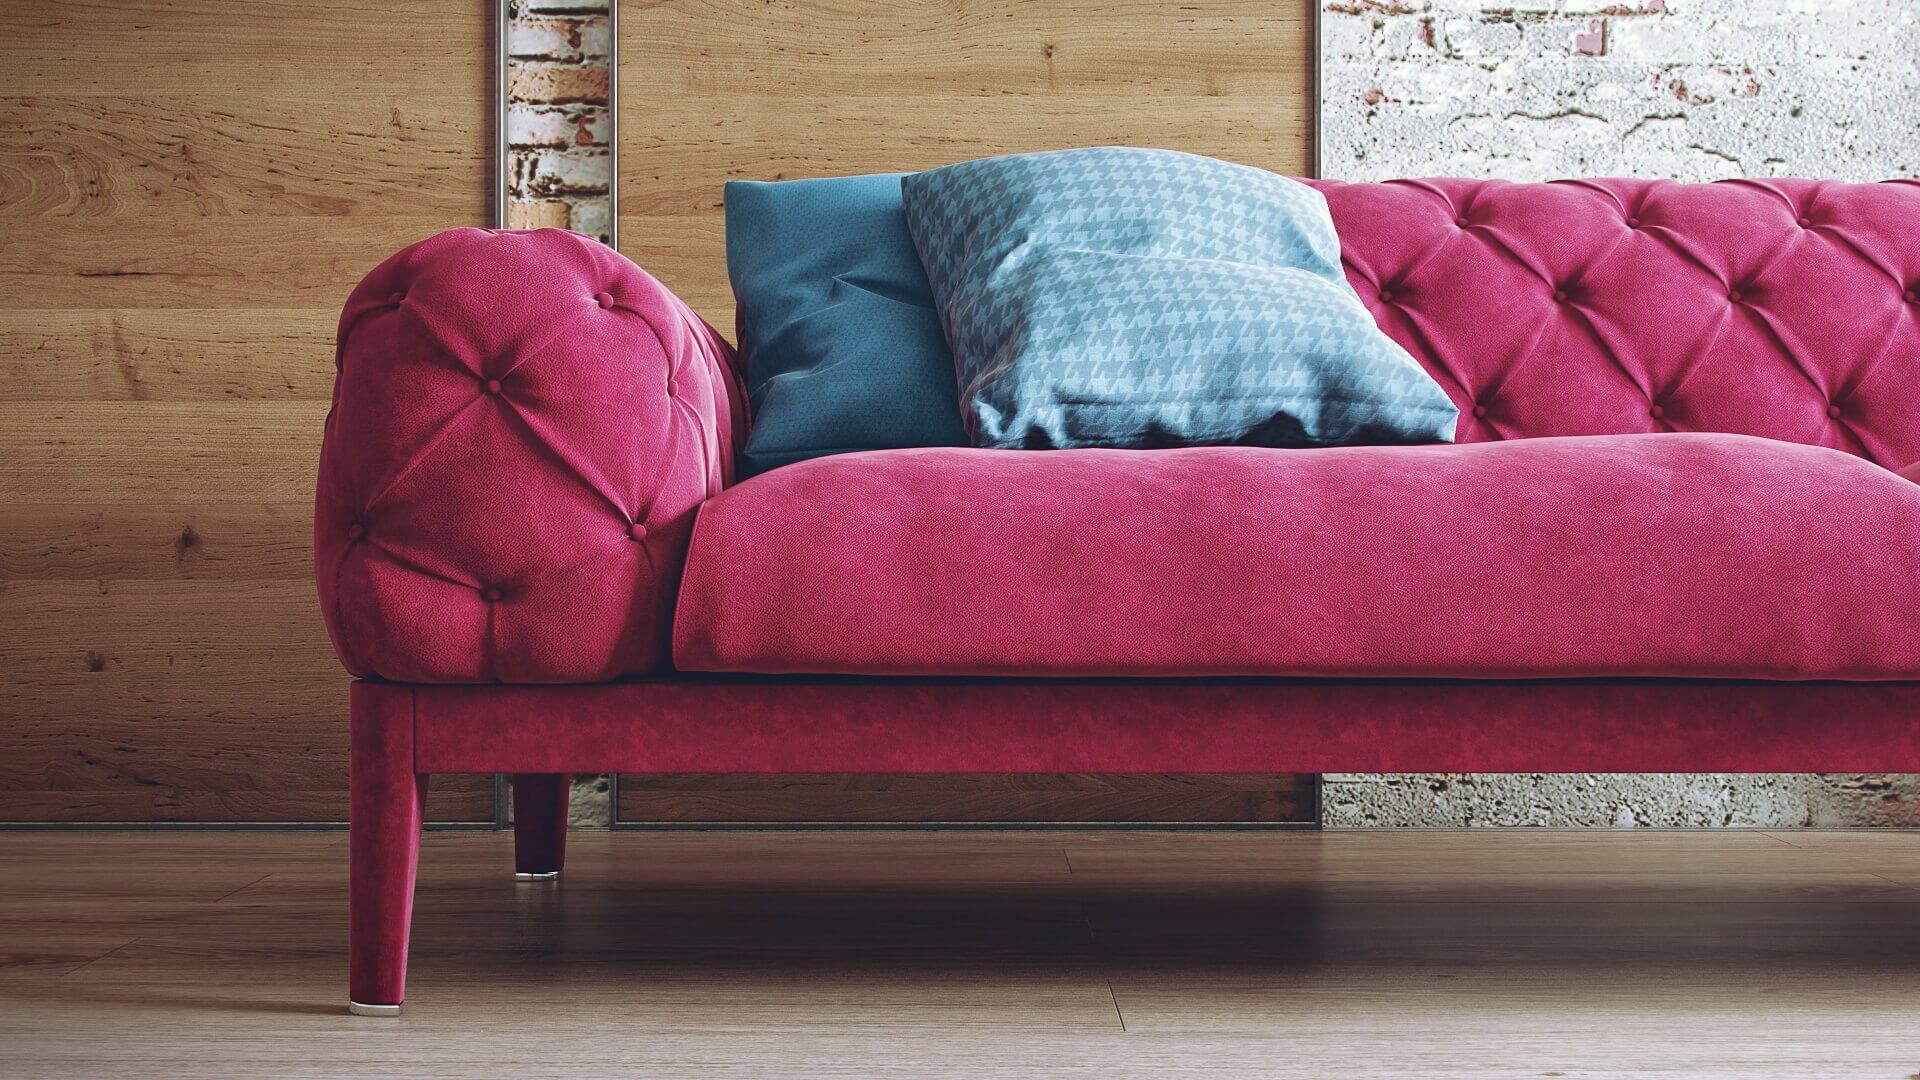 Pink Sofa 3D Rendering Close-Up View